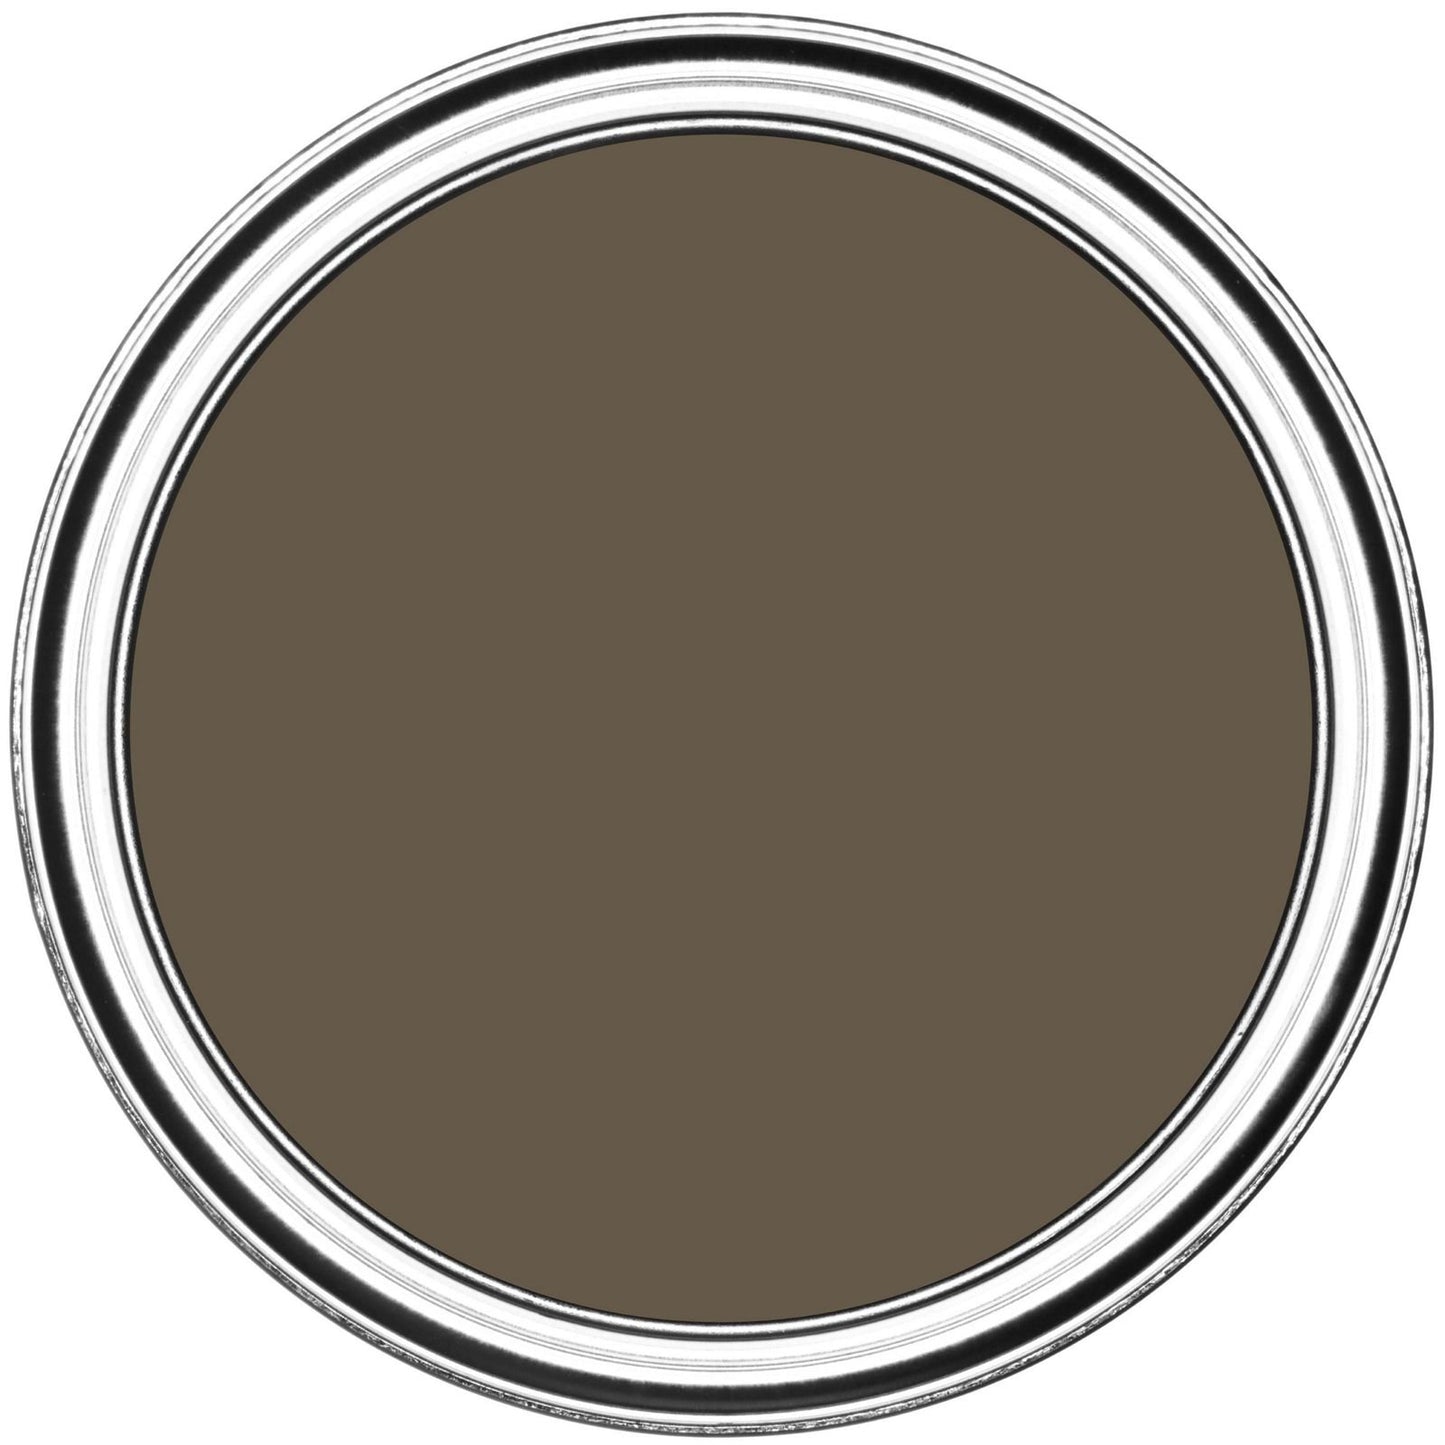 Rust-Oleum Chalky Finish Furniture Paint Cocoa